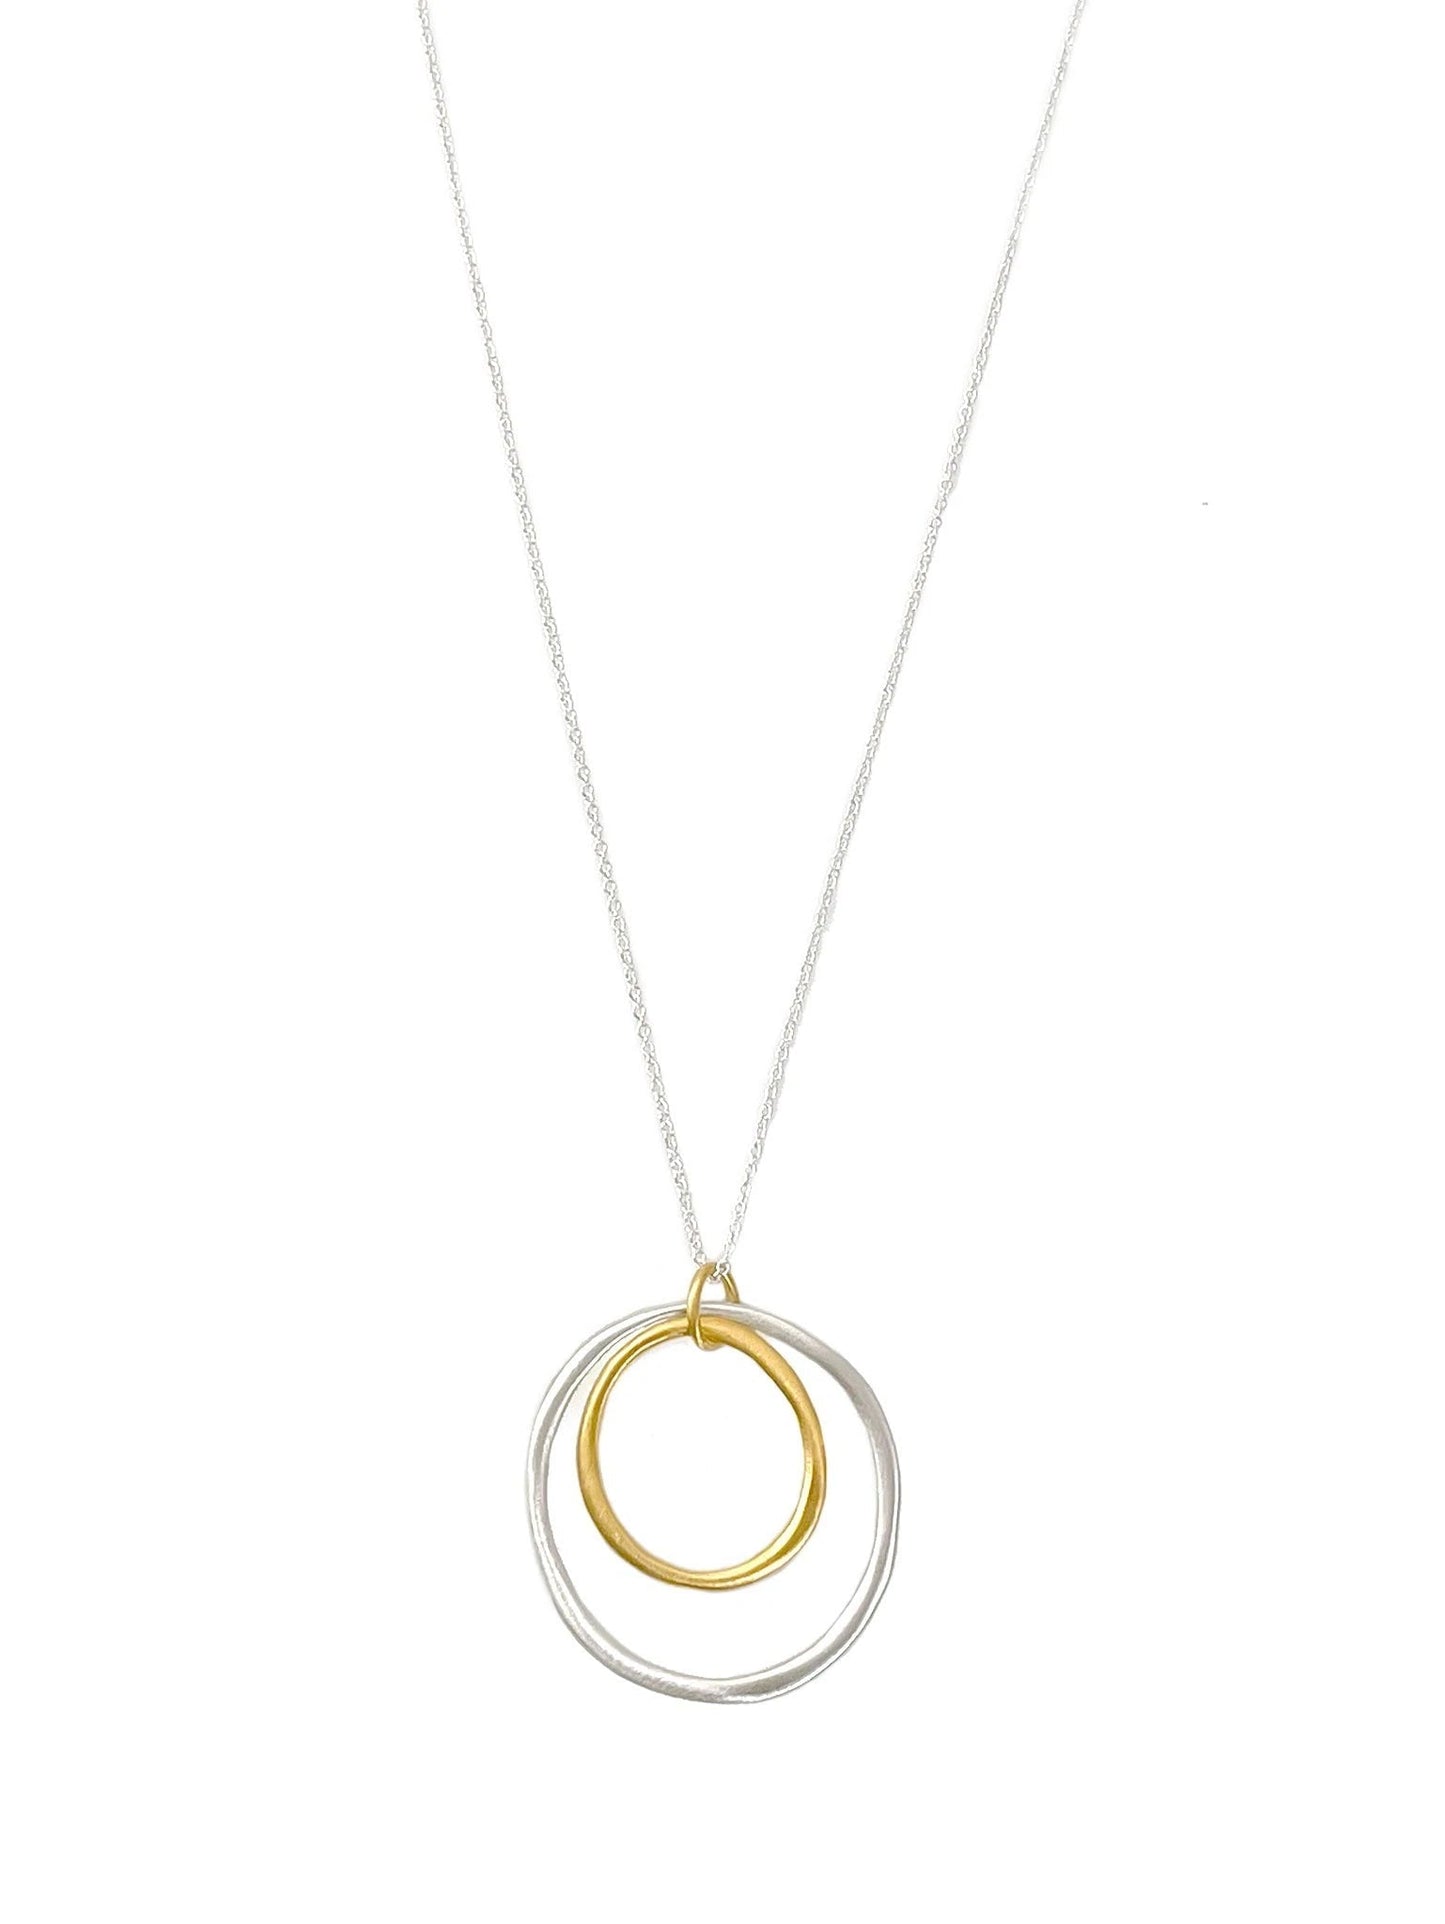 Silver & Vermeil Double Circles on Silver Chain - The Riviera Towel Company